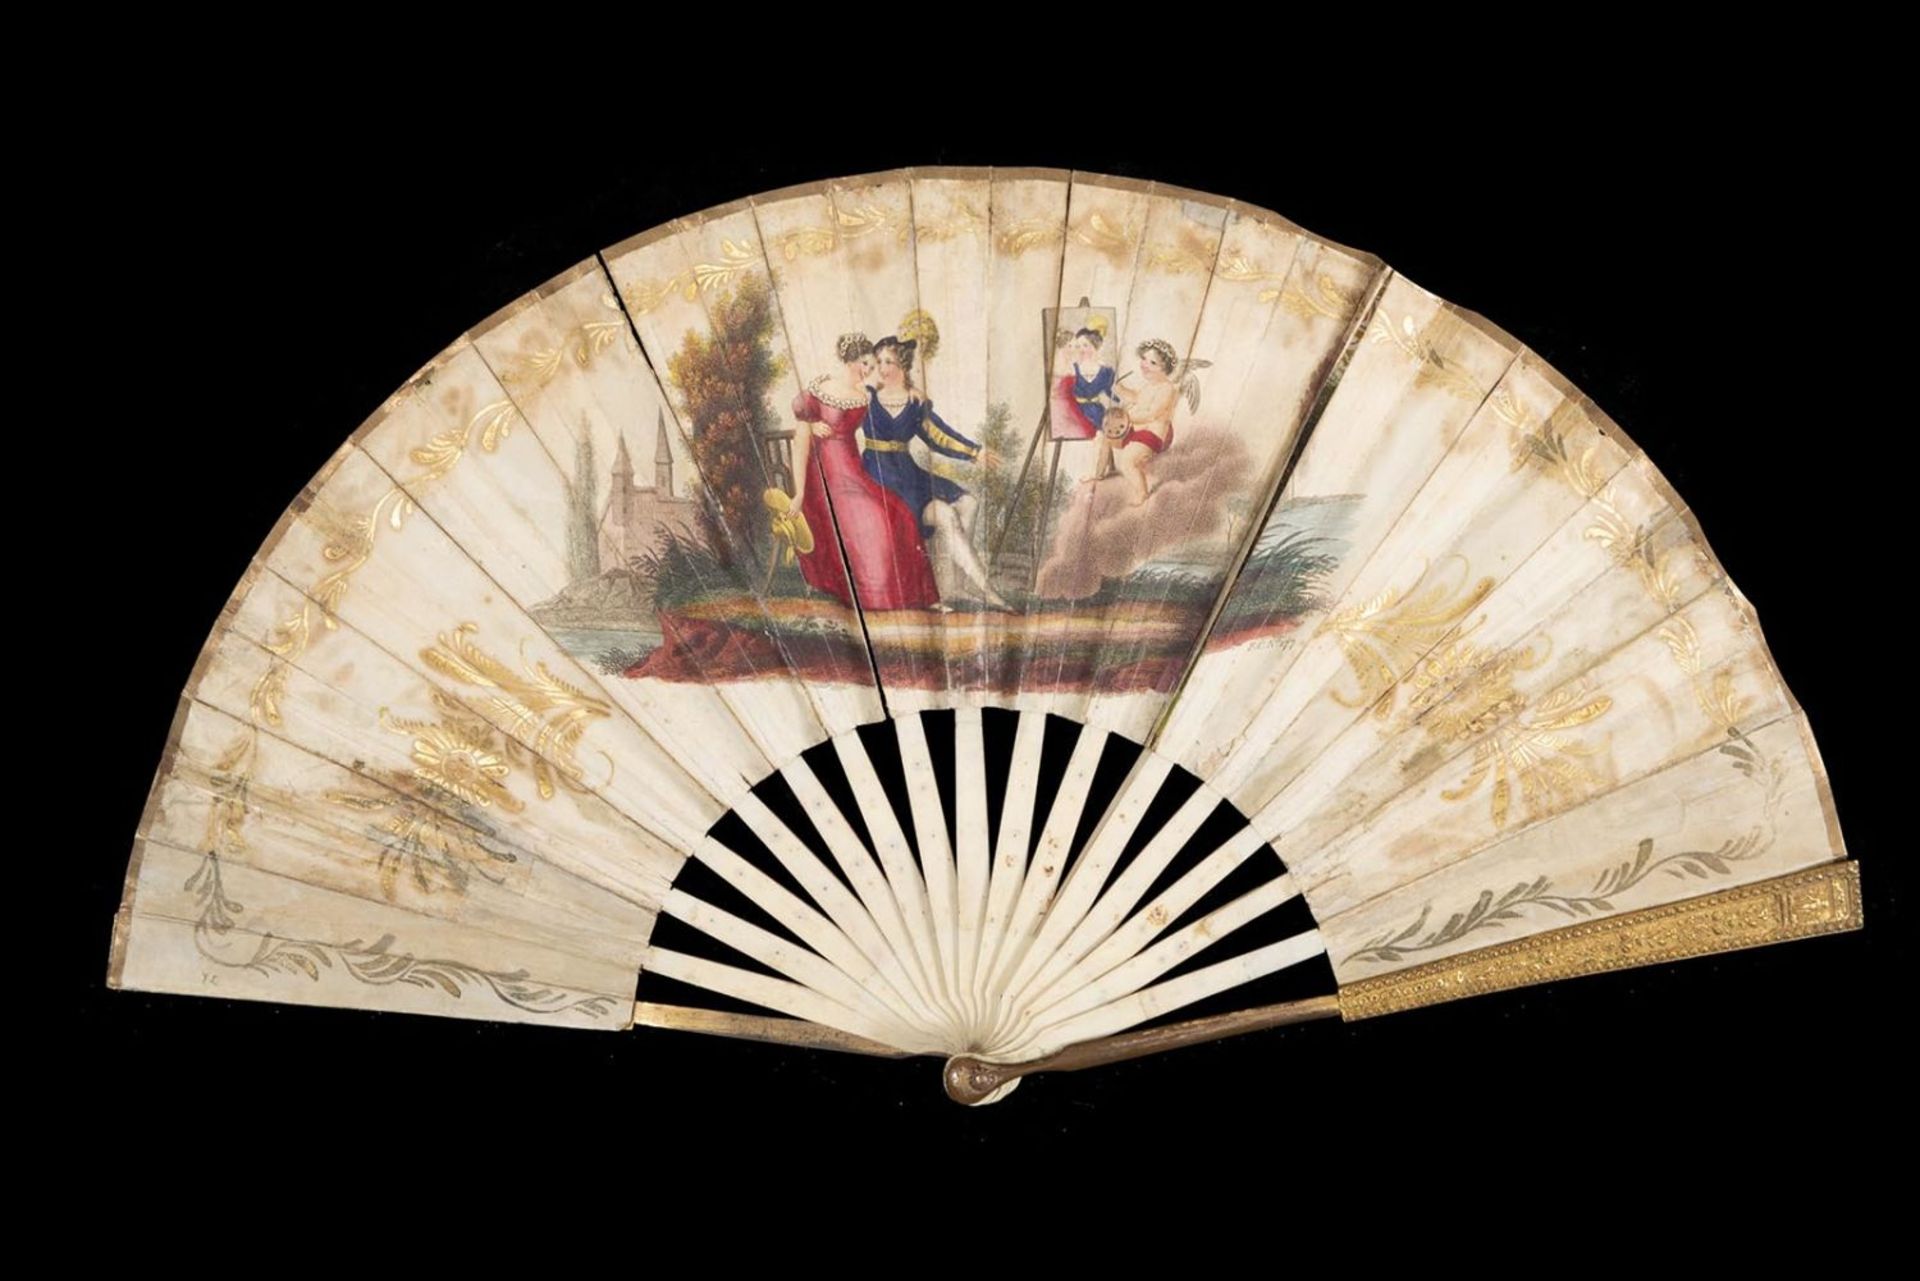 Fan with Galante couple portrayed by Cupid, 19th century